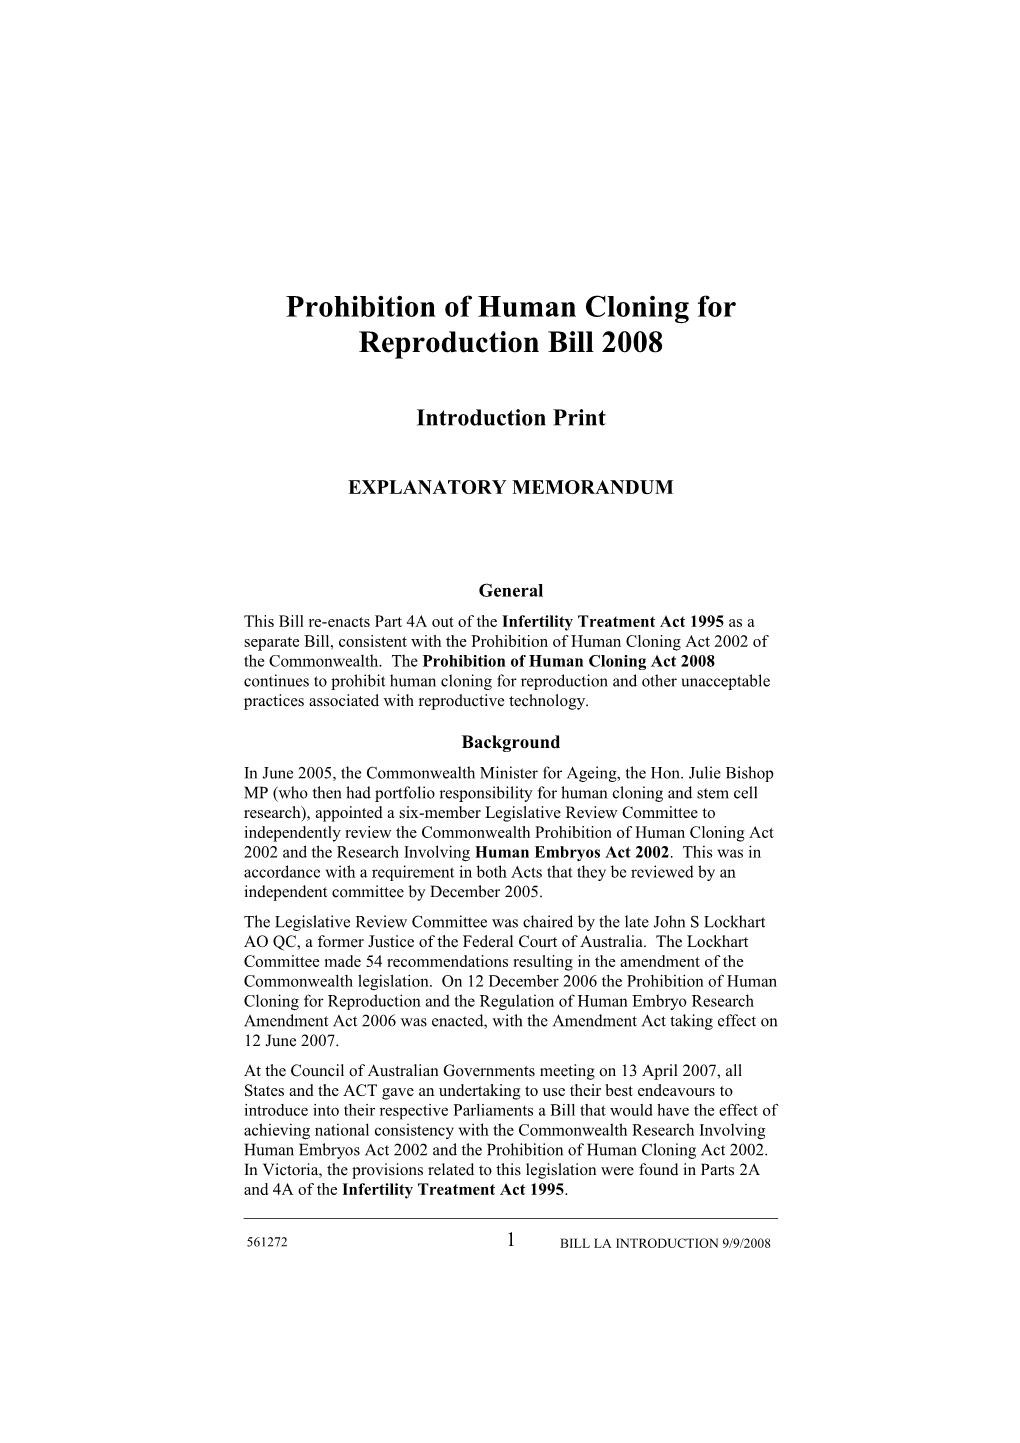 Prohibition of Human Cloning for Reproduction Bill 2008